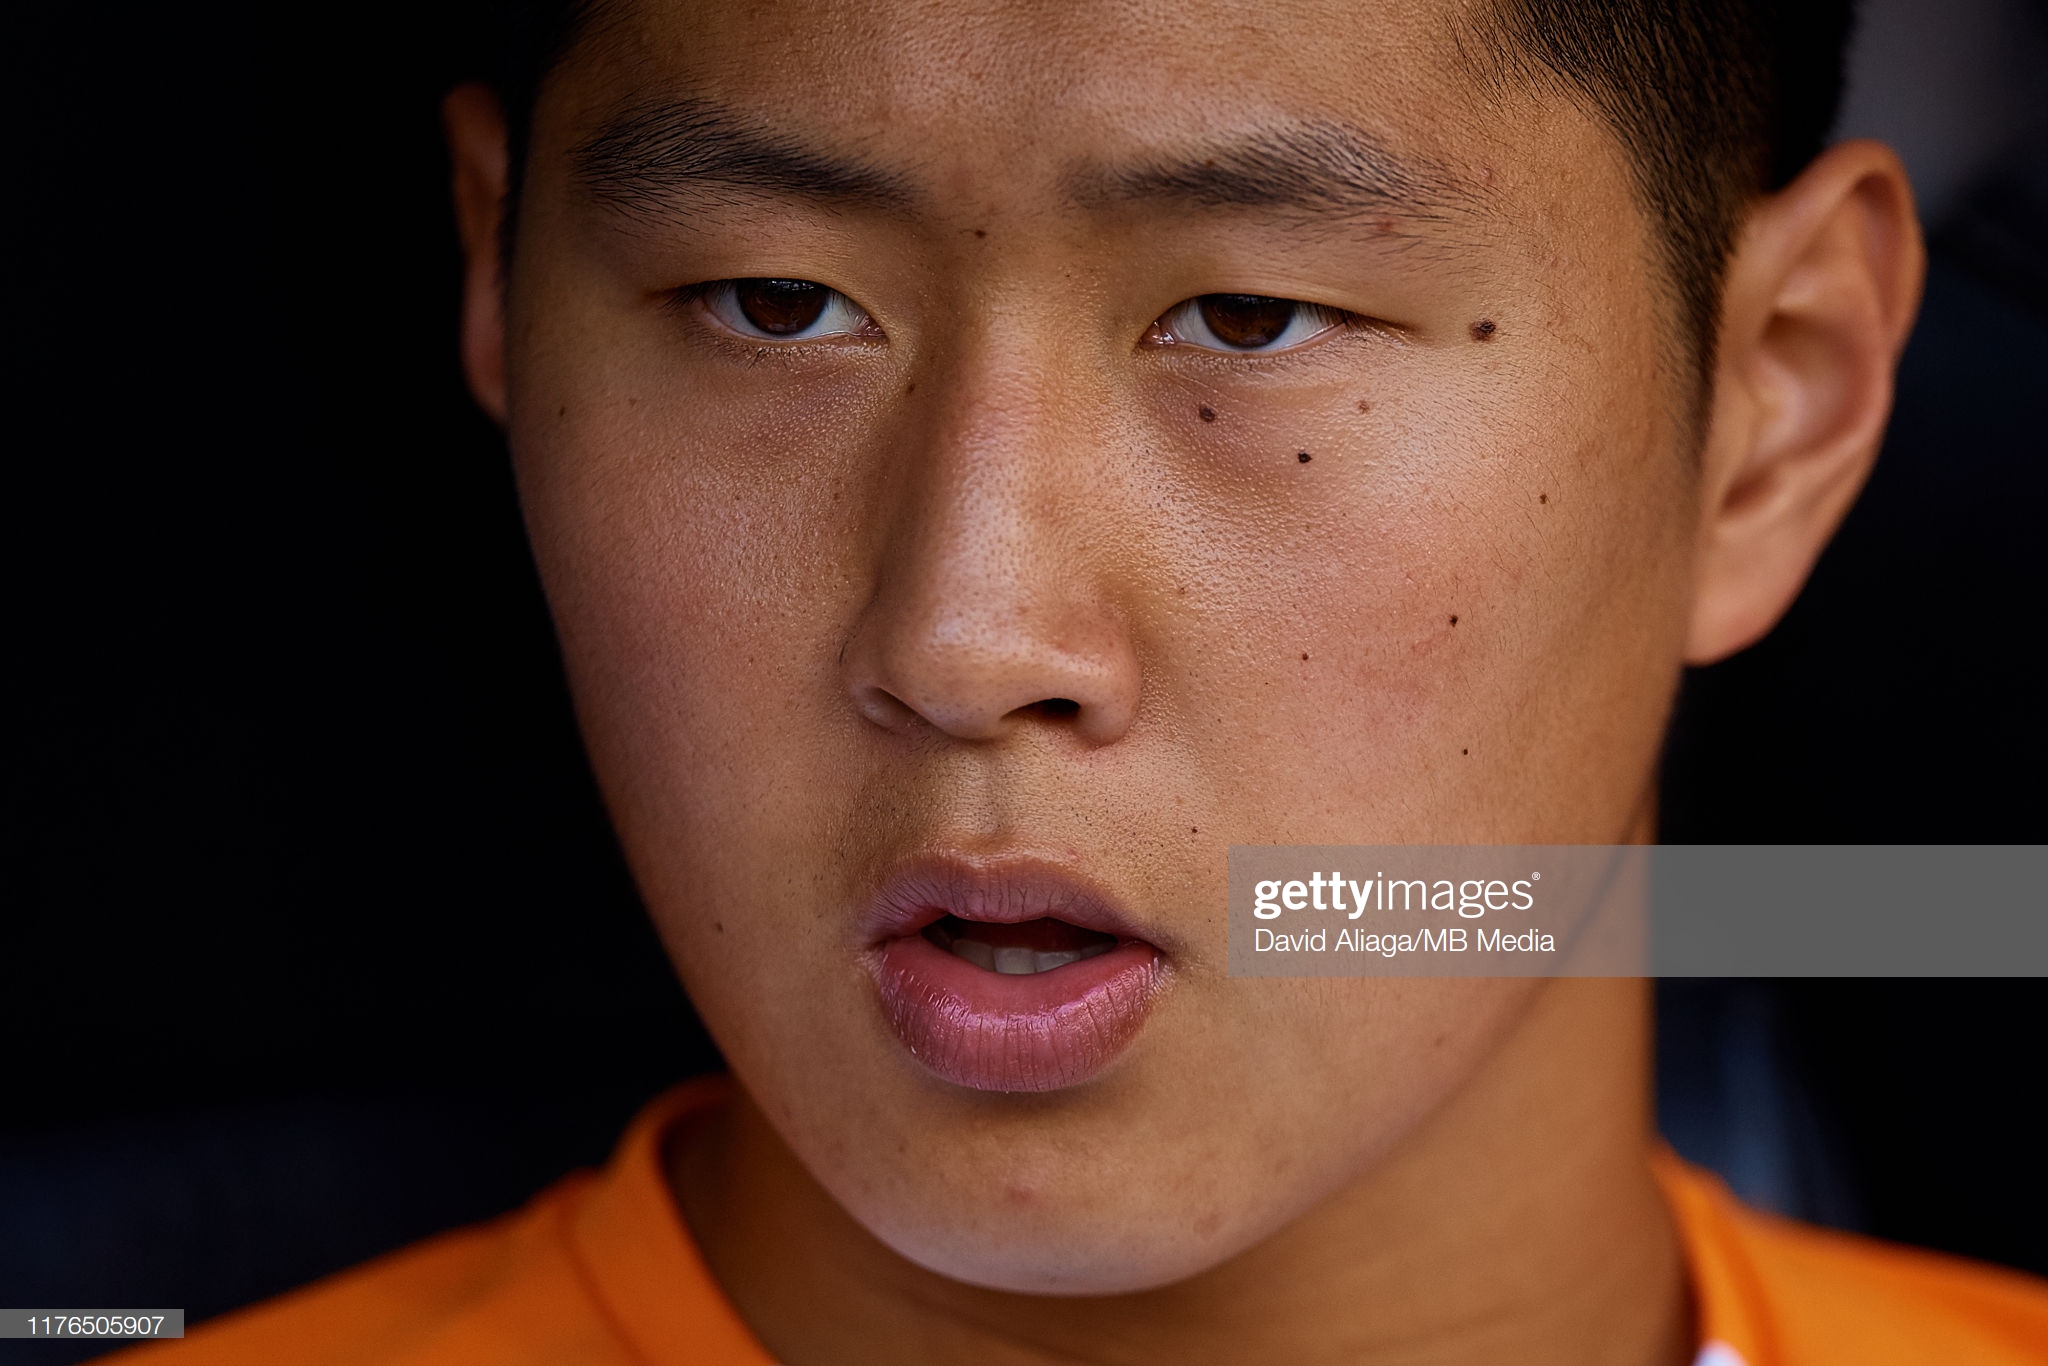 gettyimages-1176505907-2048x2048.jpg